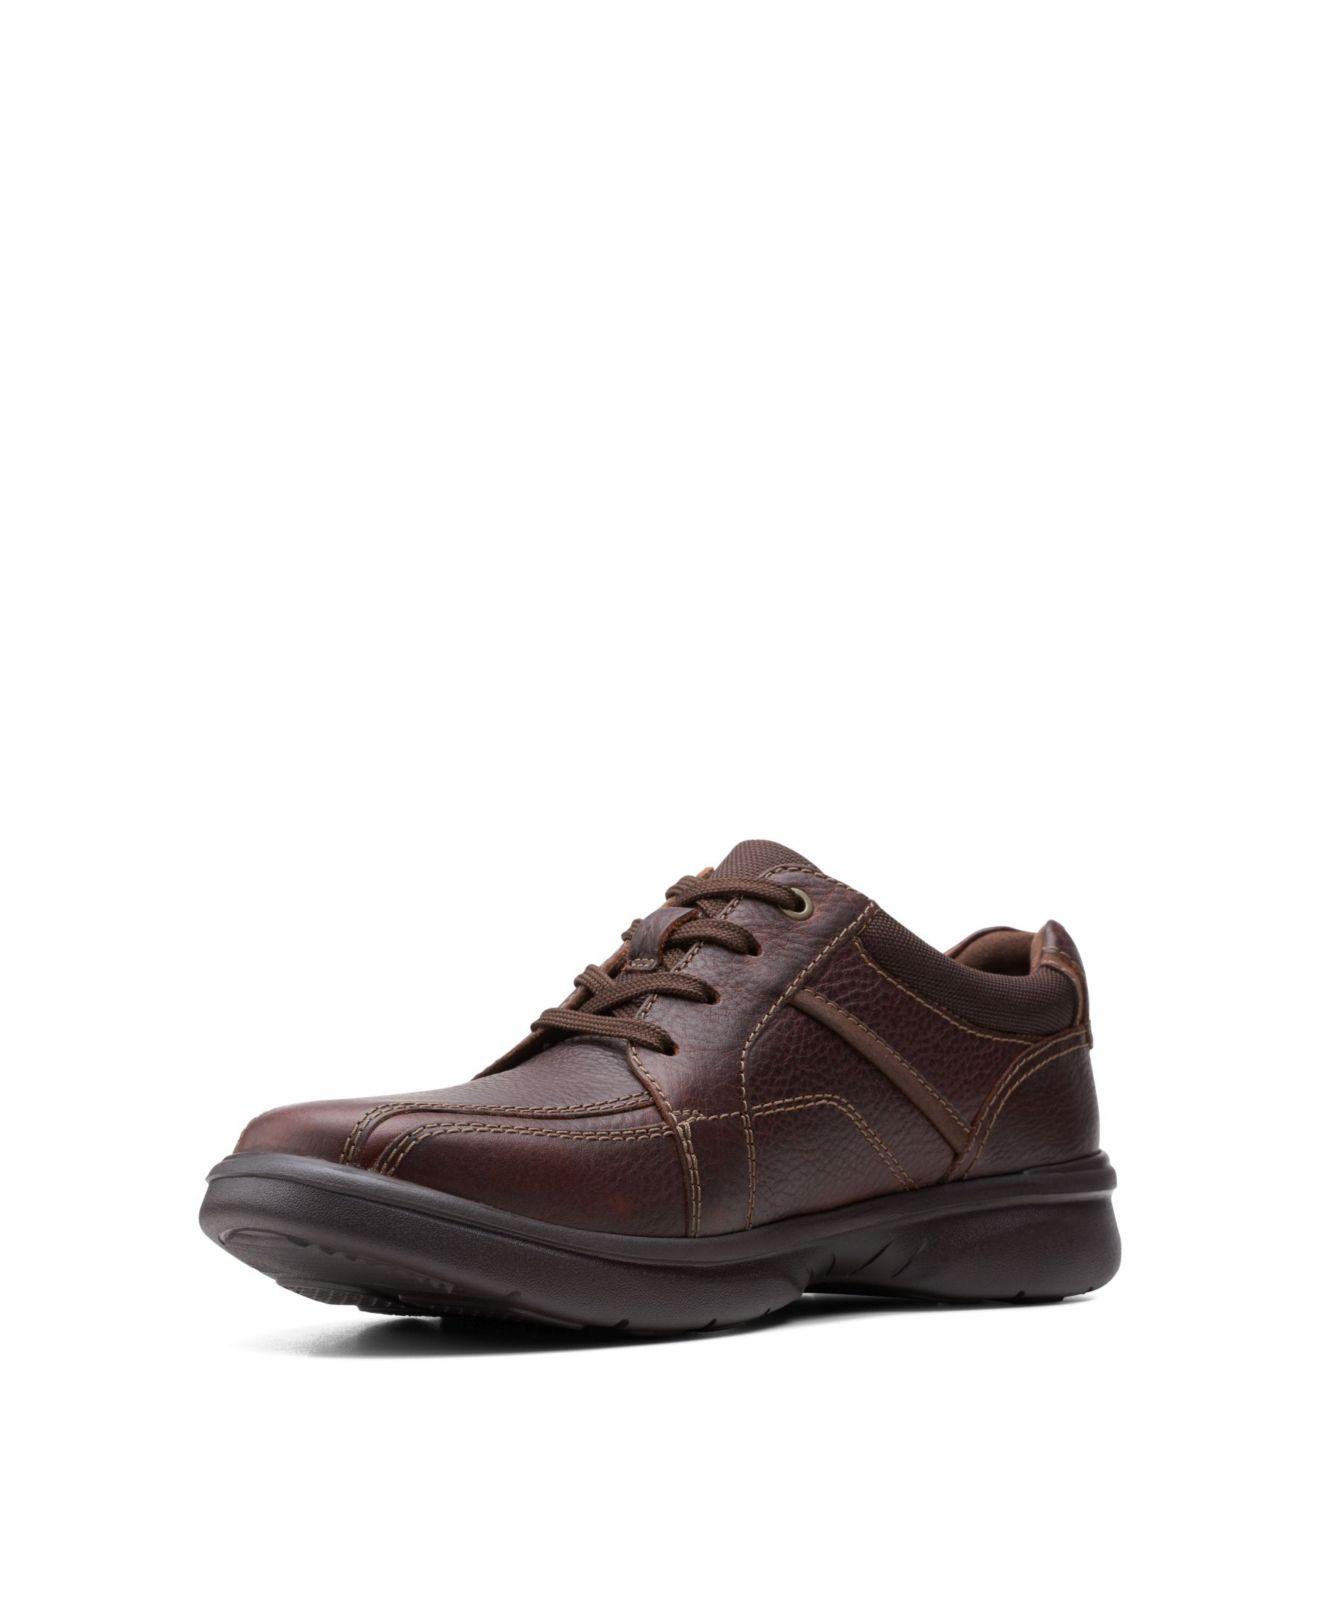 Clarks Leather Bradley Walk Lace-up Shoes in Brown for Men - Lyst